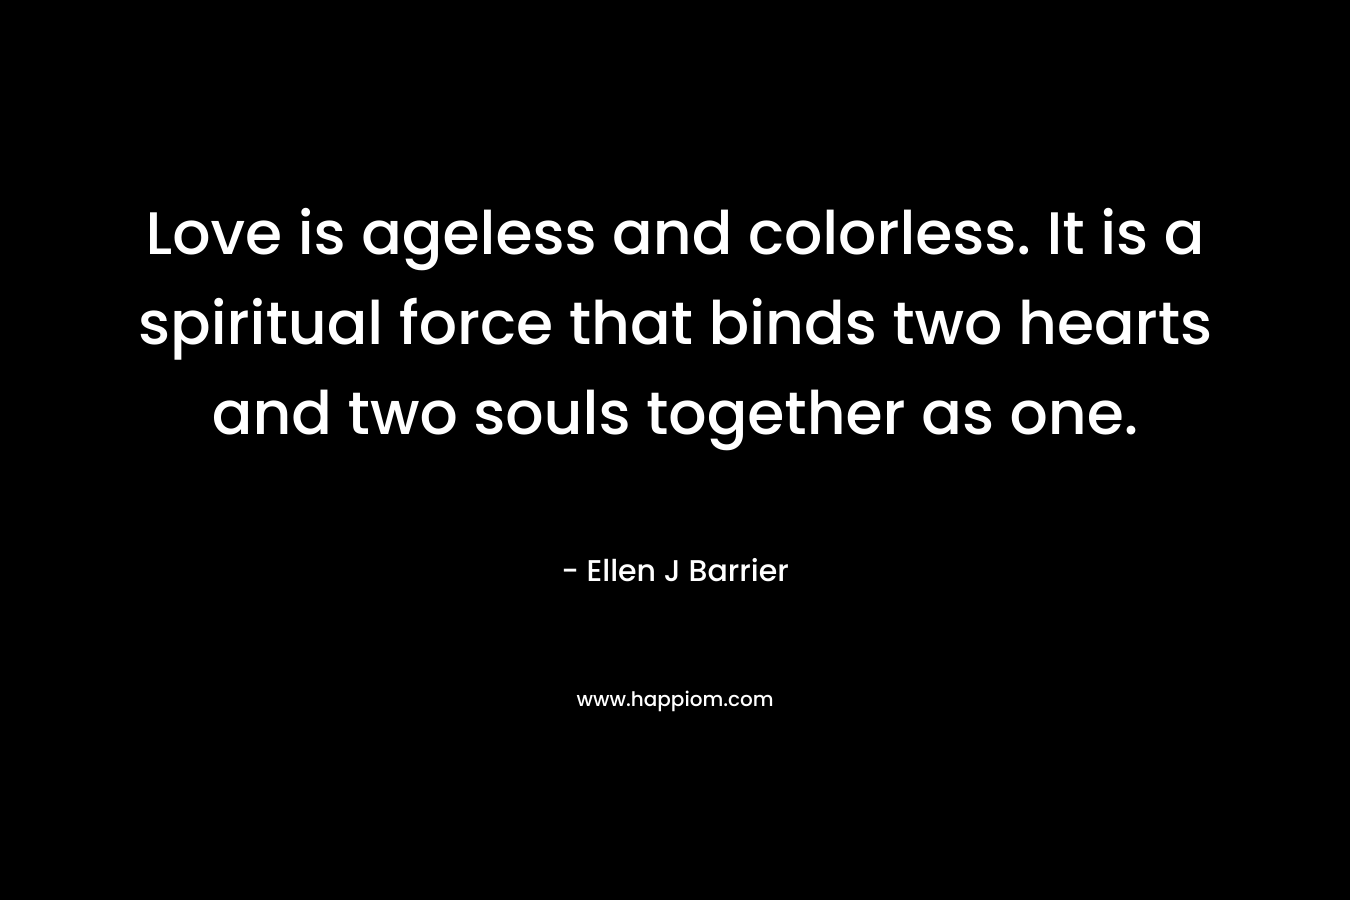 Love is ageless and colorless. It is a spiritual force that binds two hearts and two souls together as one.